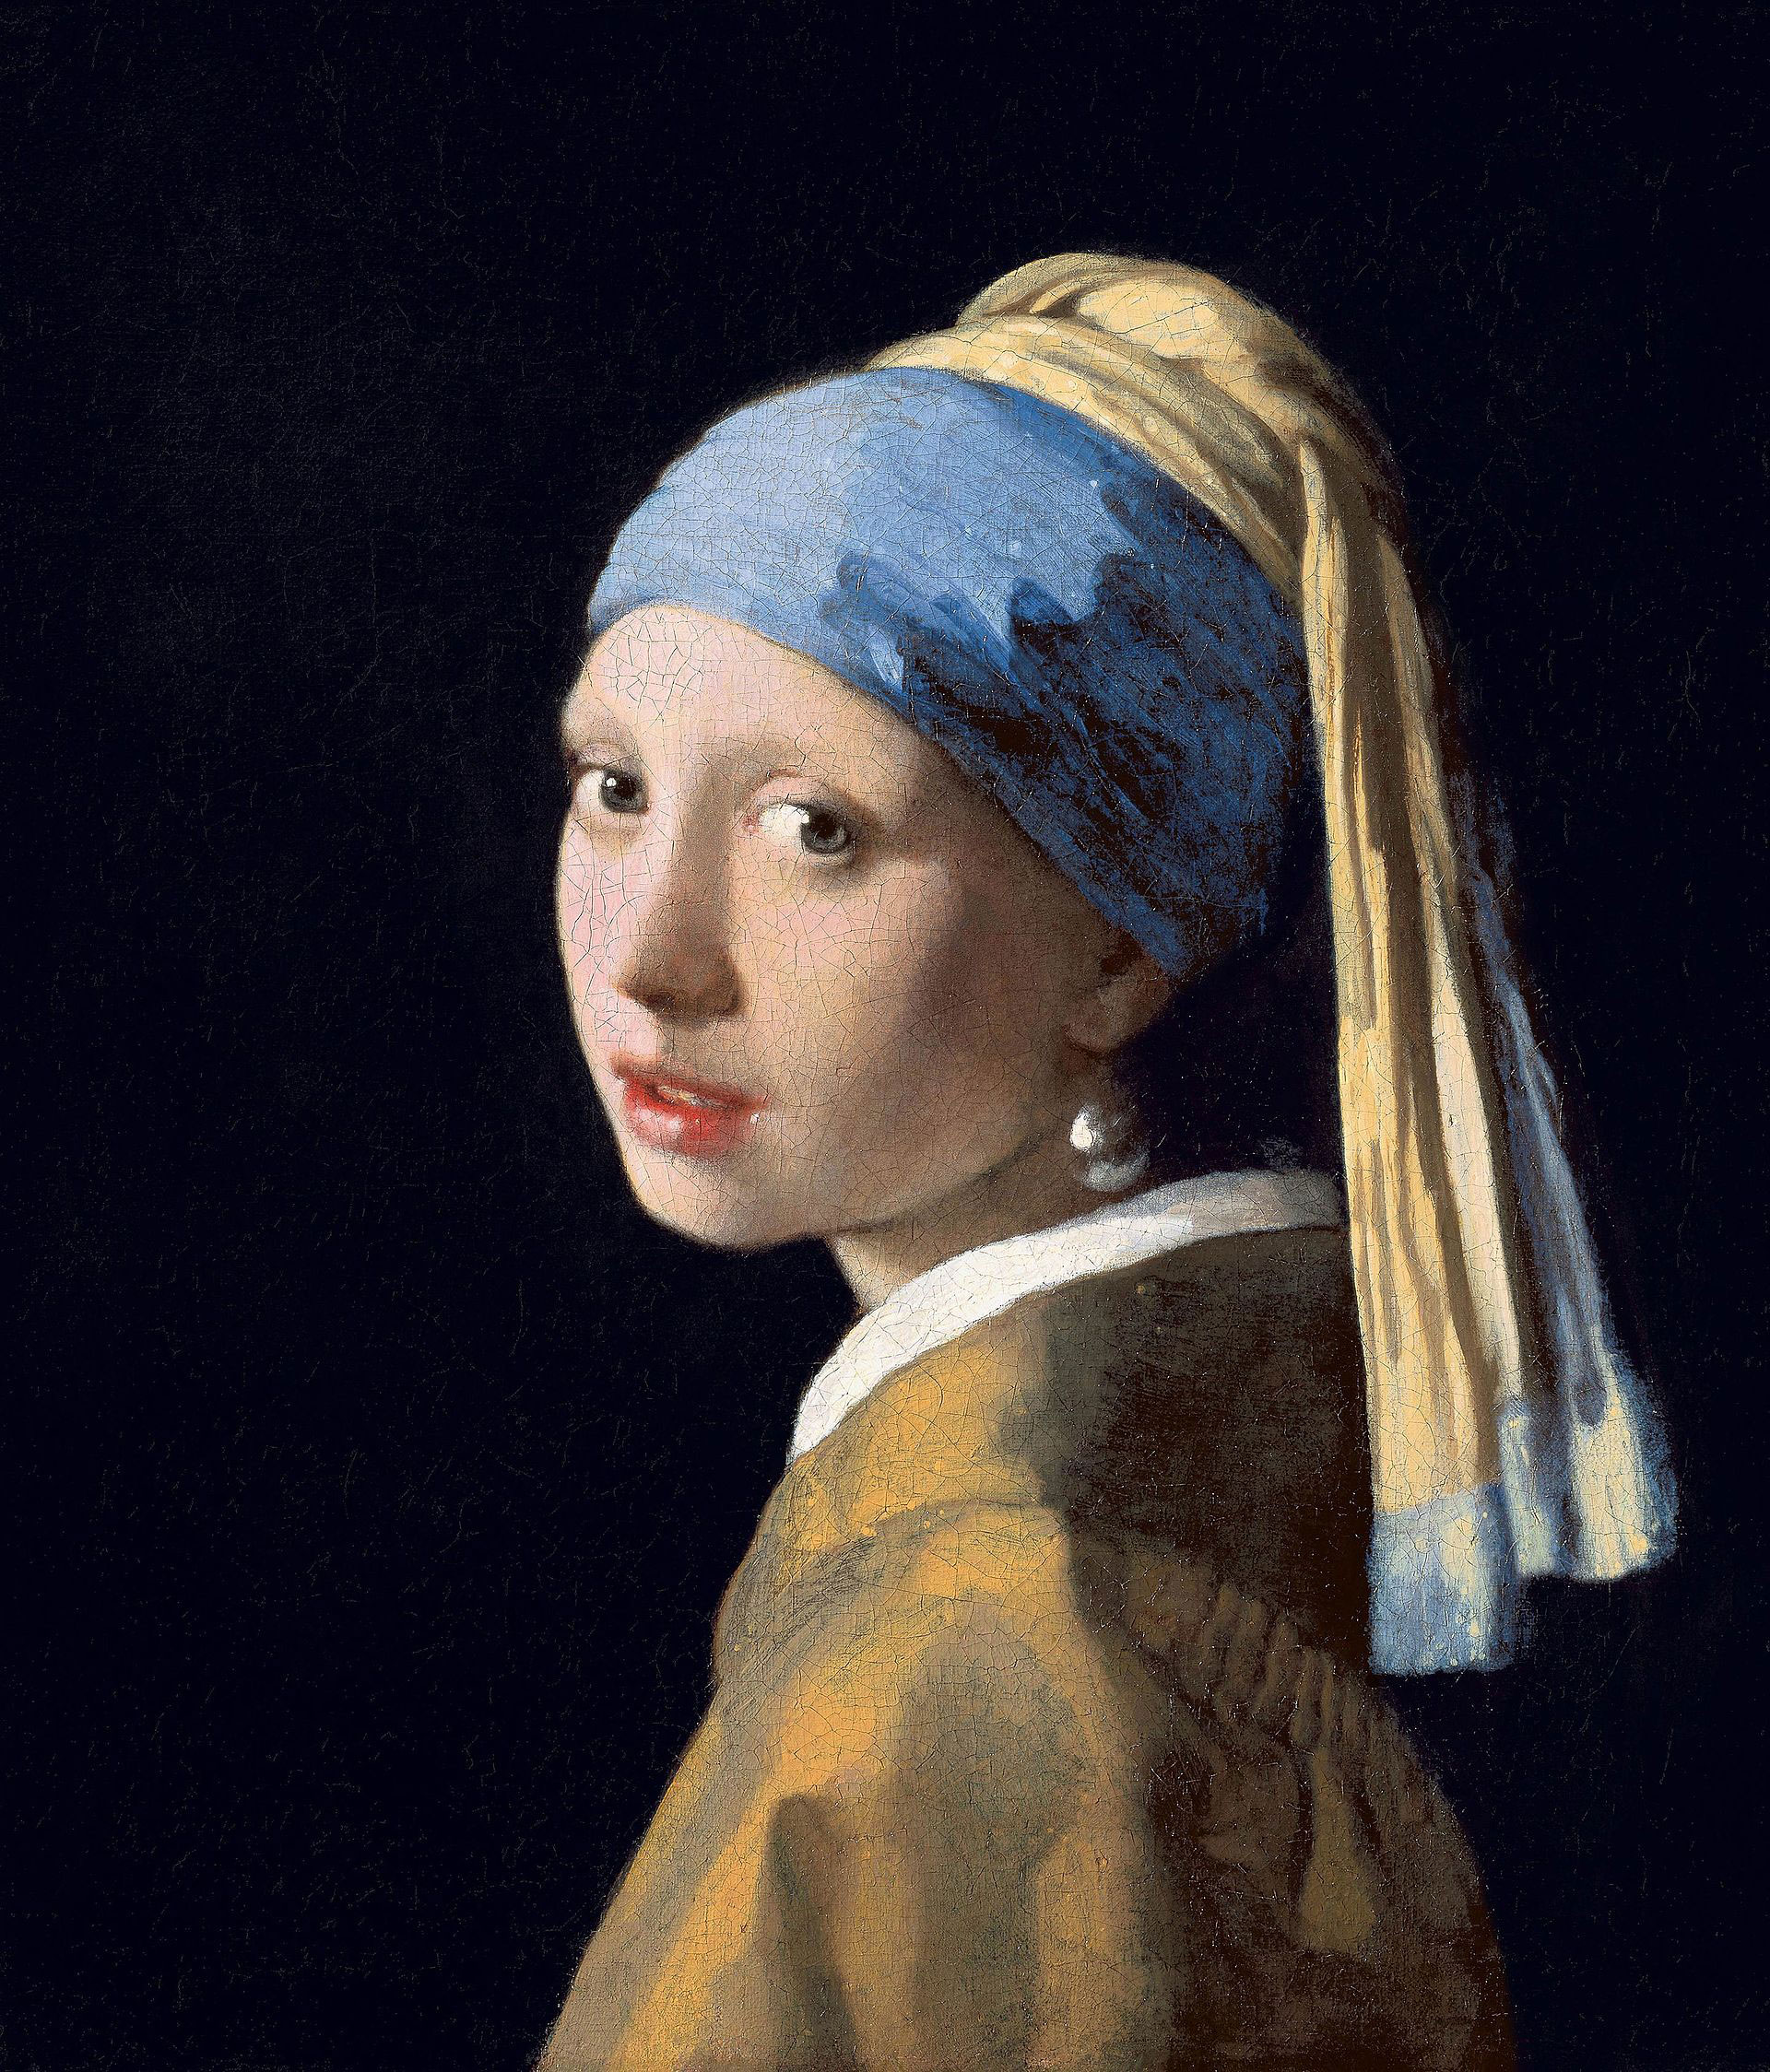 Johannes Vermeer - Girl With A Pearl Earring, 1665